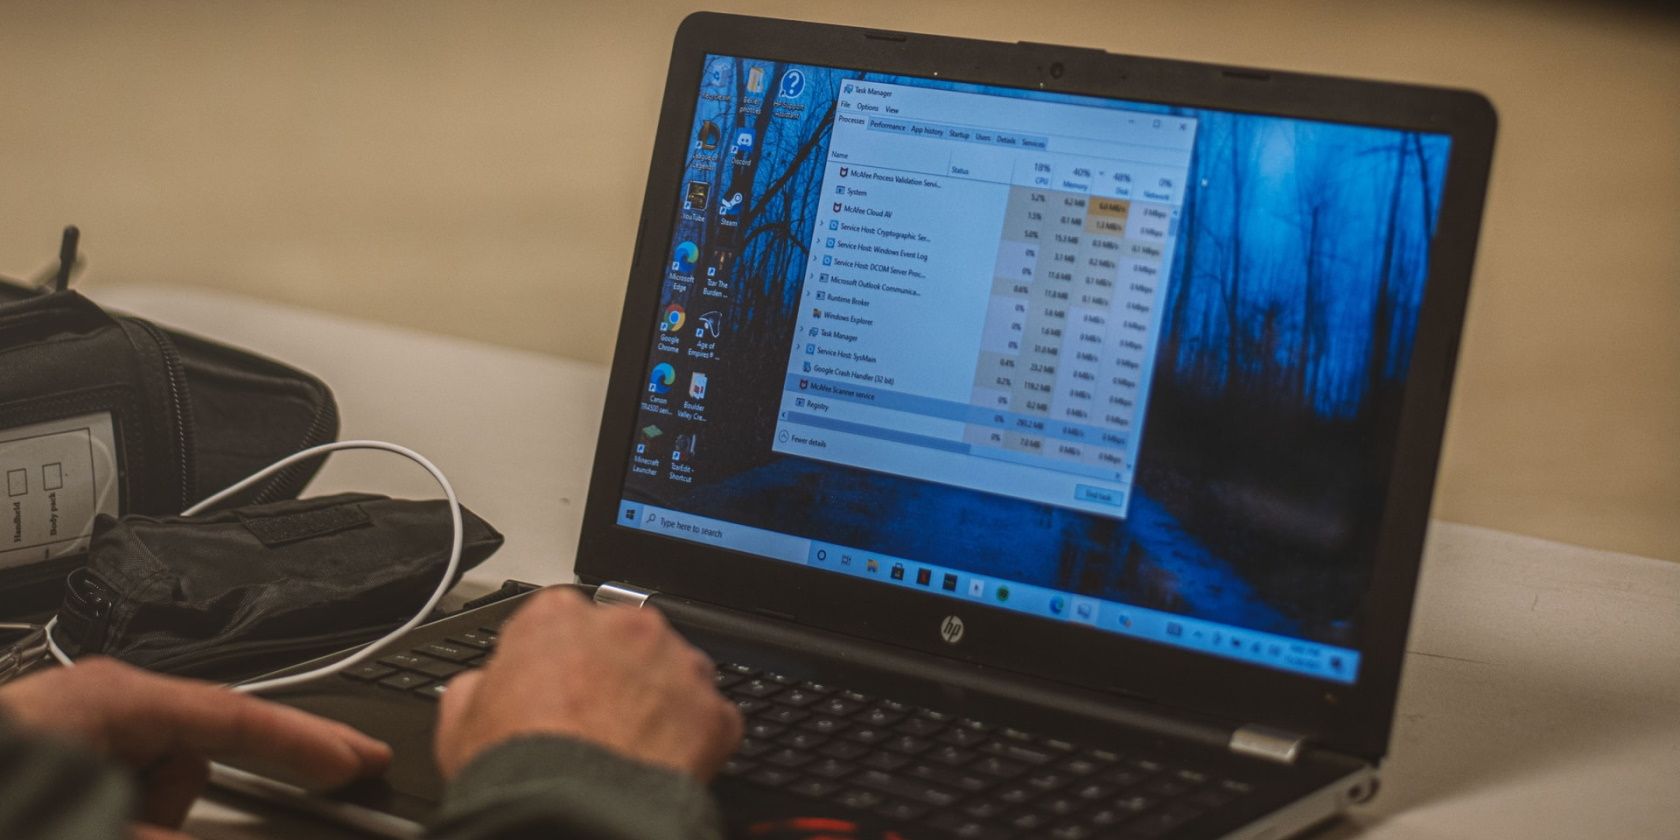 closeup of a laptop running windows 10 with a man scrolling via touchpad